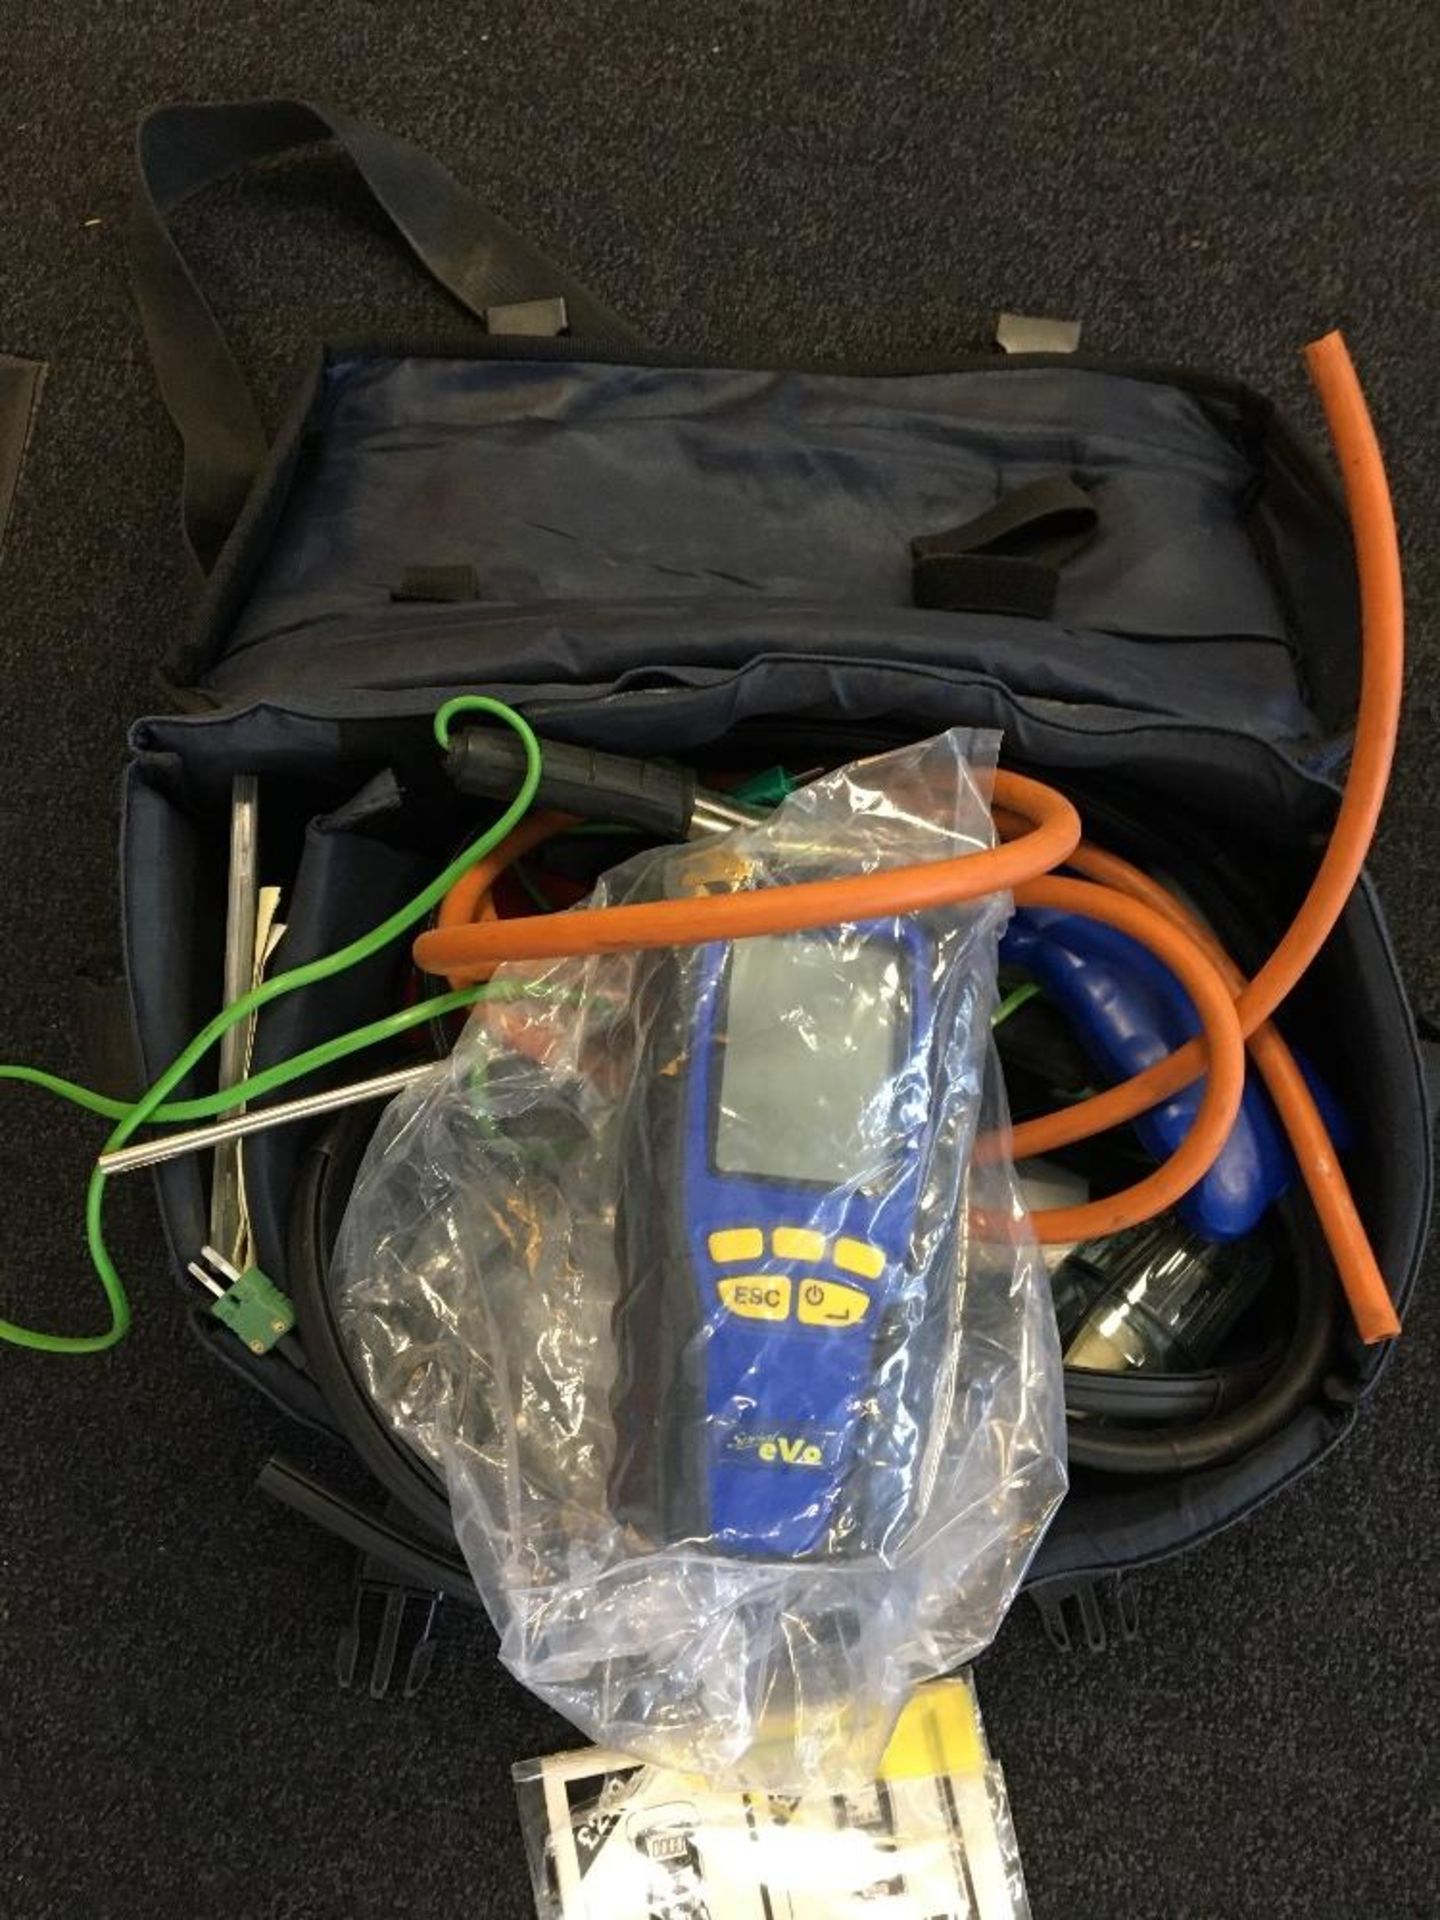 Sprint EVO1 Flue Gas Analyser Kit with carry case - Image 4 of 4